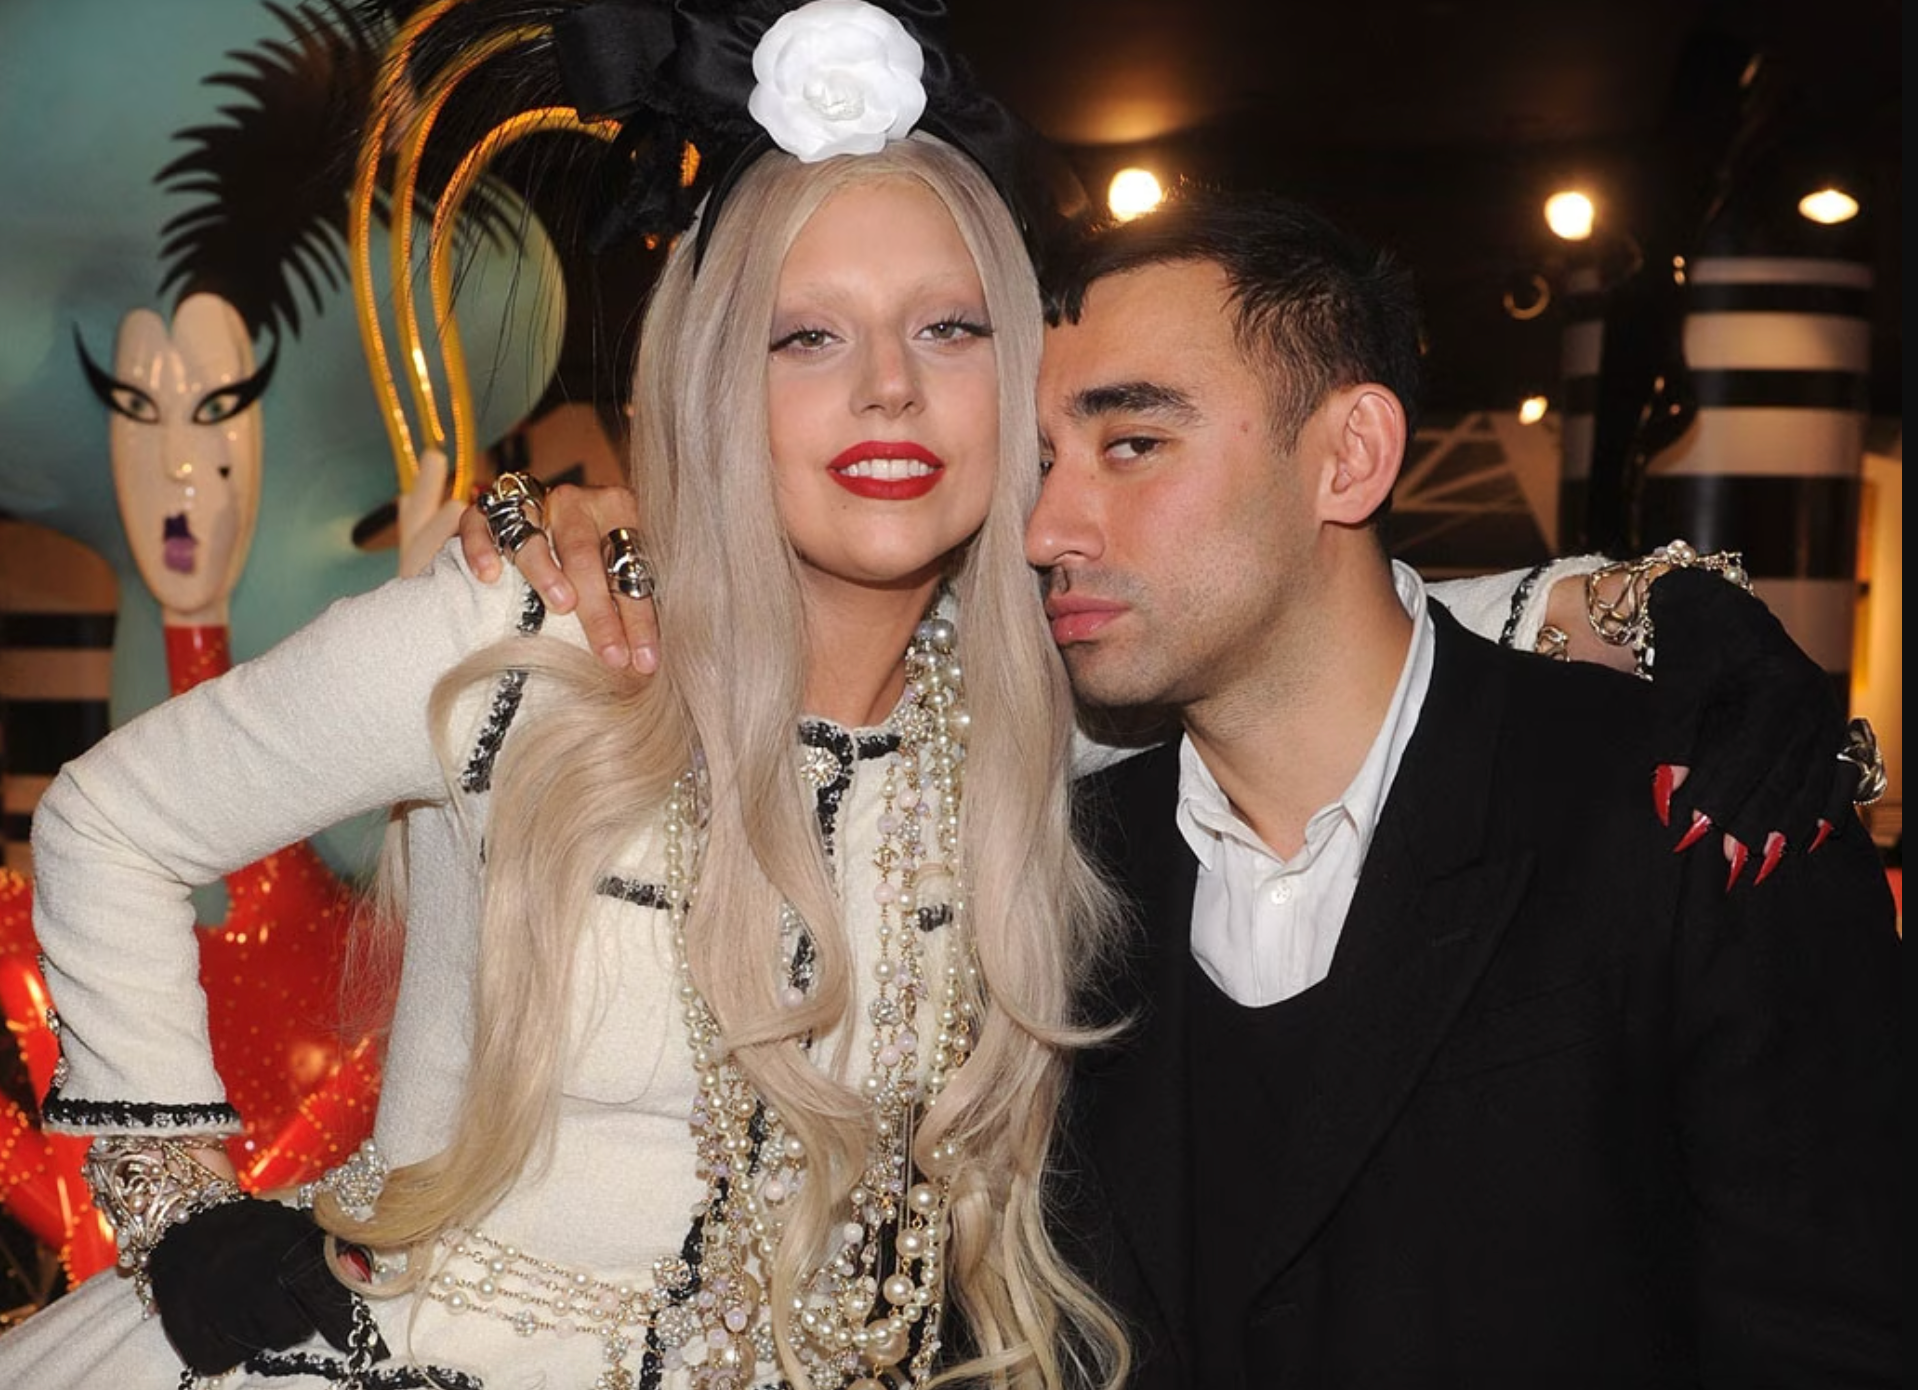 Formichetti is the stylistic brains behind some of pop powerhouse Lady Gaga's most iconic looks. Photo: E!News